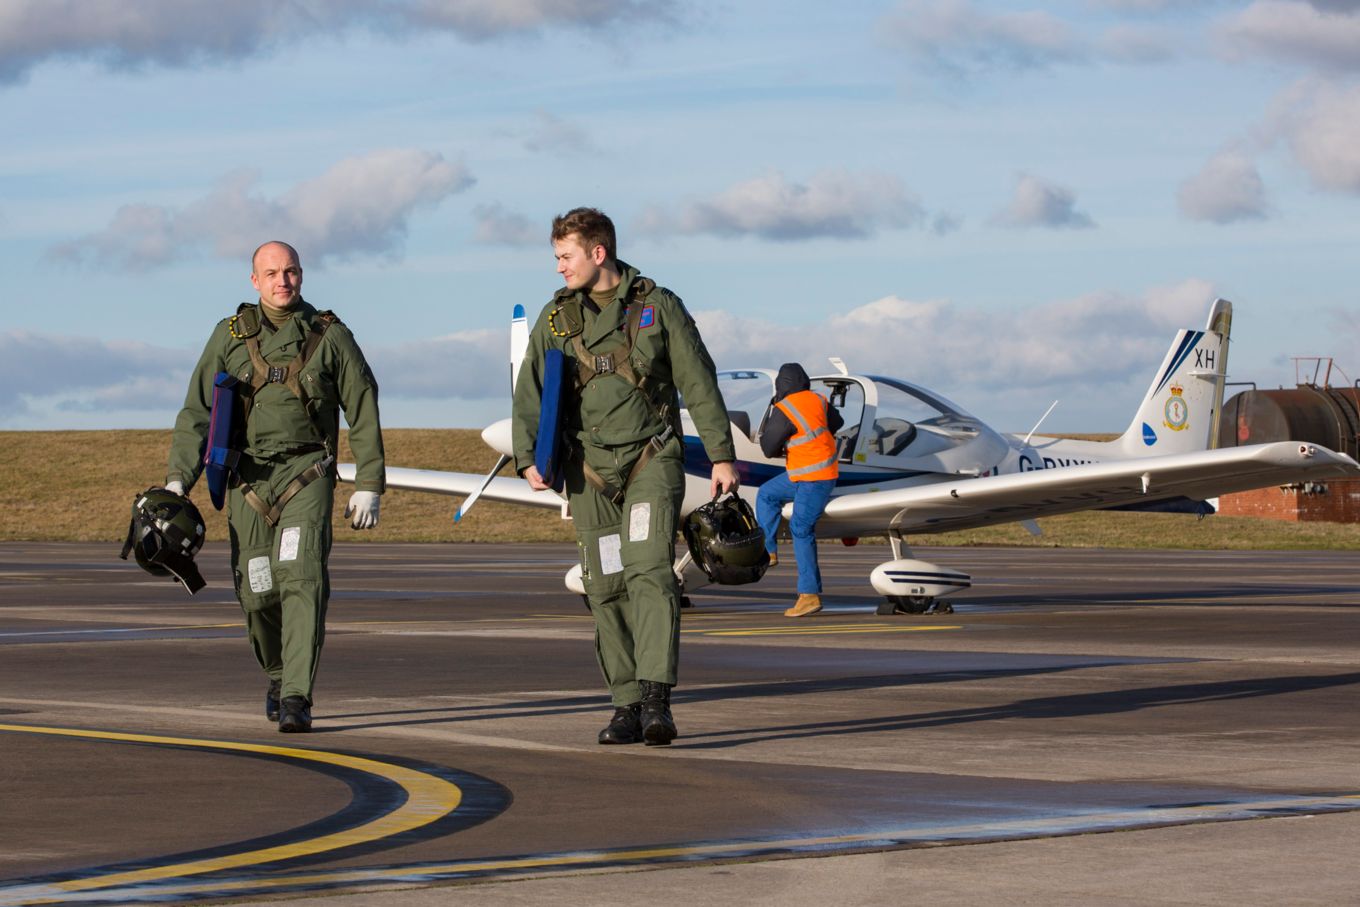 Flt Lt Latchem and a student from 16 Sqn return from a sortie